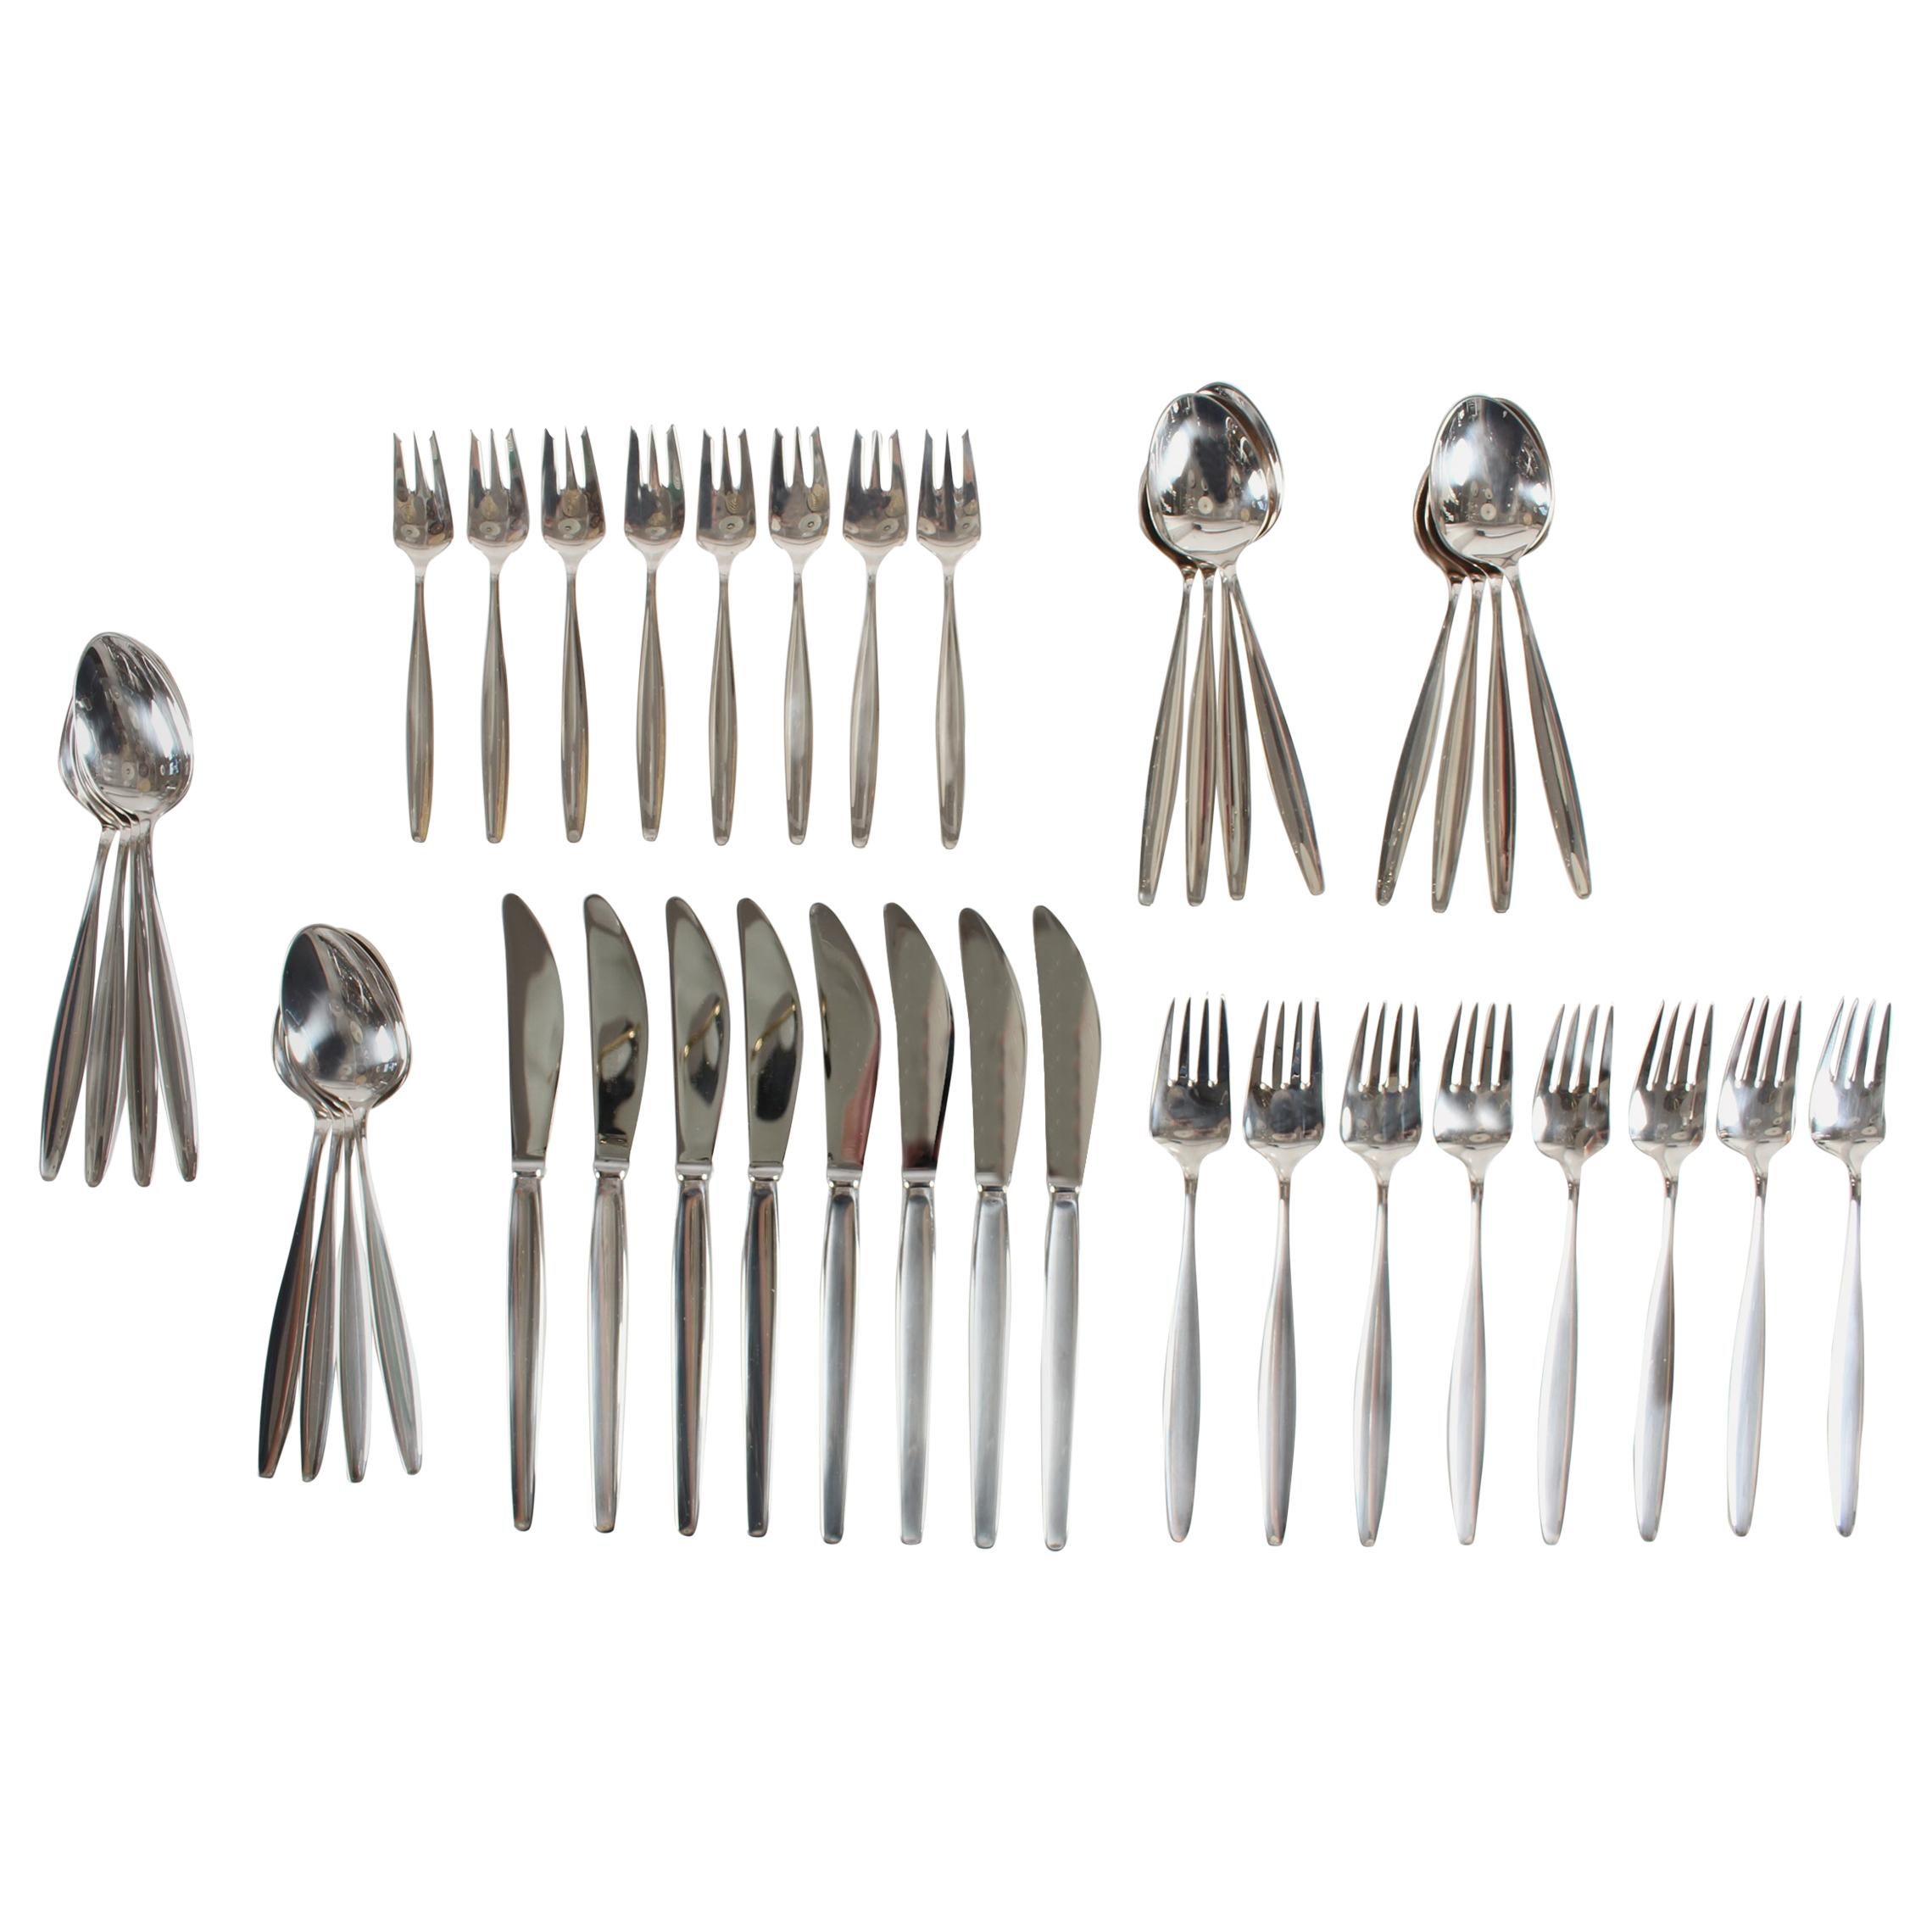 Georg Jensen Sterling Silver Cypres by Tias Eckhoff Cutlery Set for 8 Persons